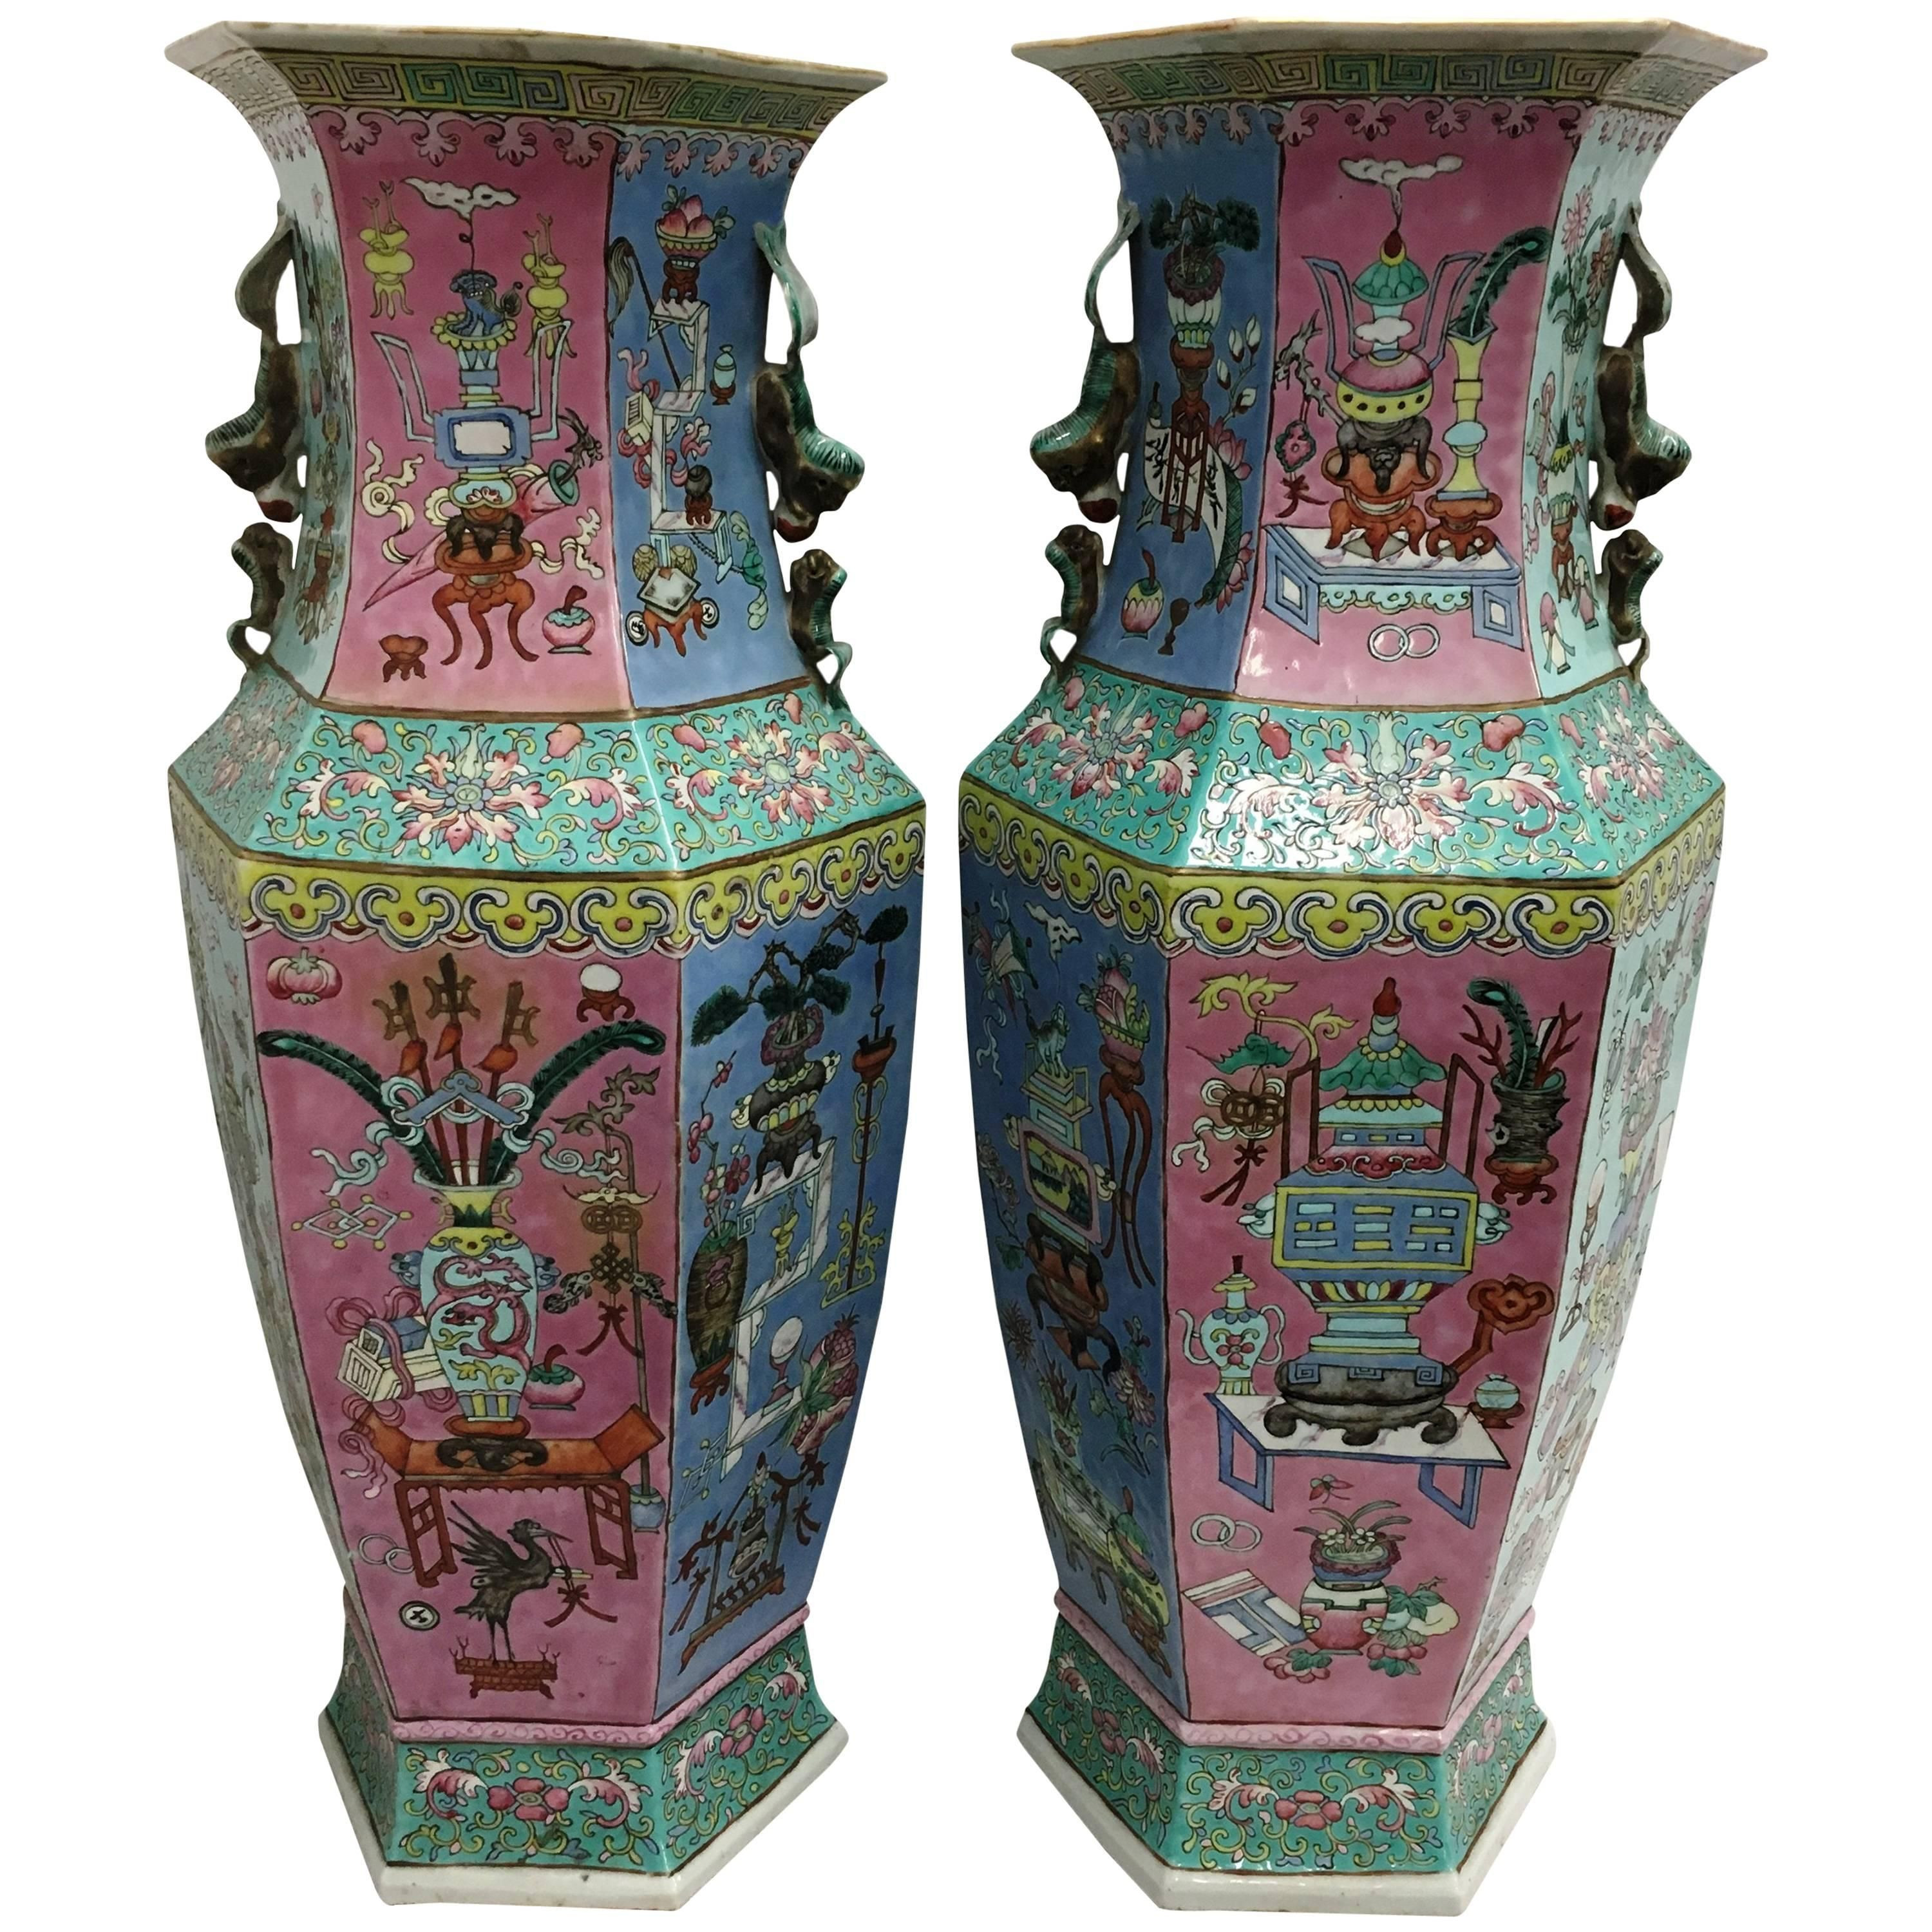 22 Fantastic Cherry Blossom Vase 2024 free download cherry blossom vase of square ceramic vase fresh chinese 19th century famille rose lidded with square ceramic vase fresh chinese 19th century famille rose lidded vase or lamp for sale at